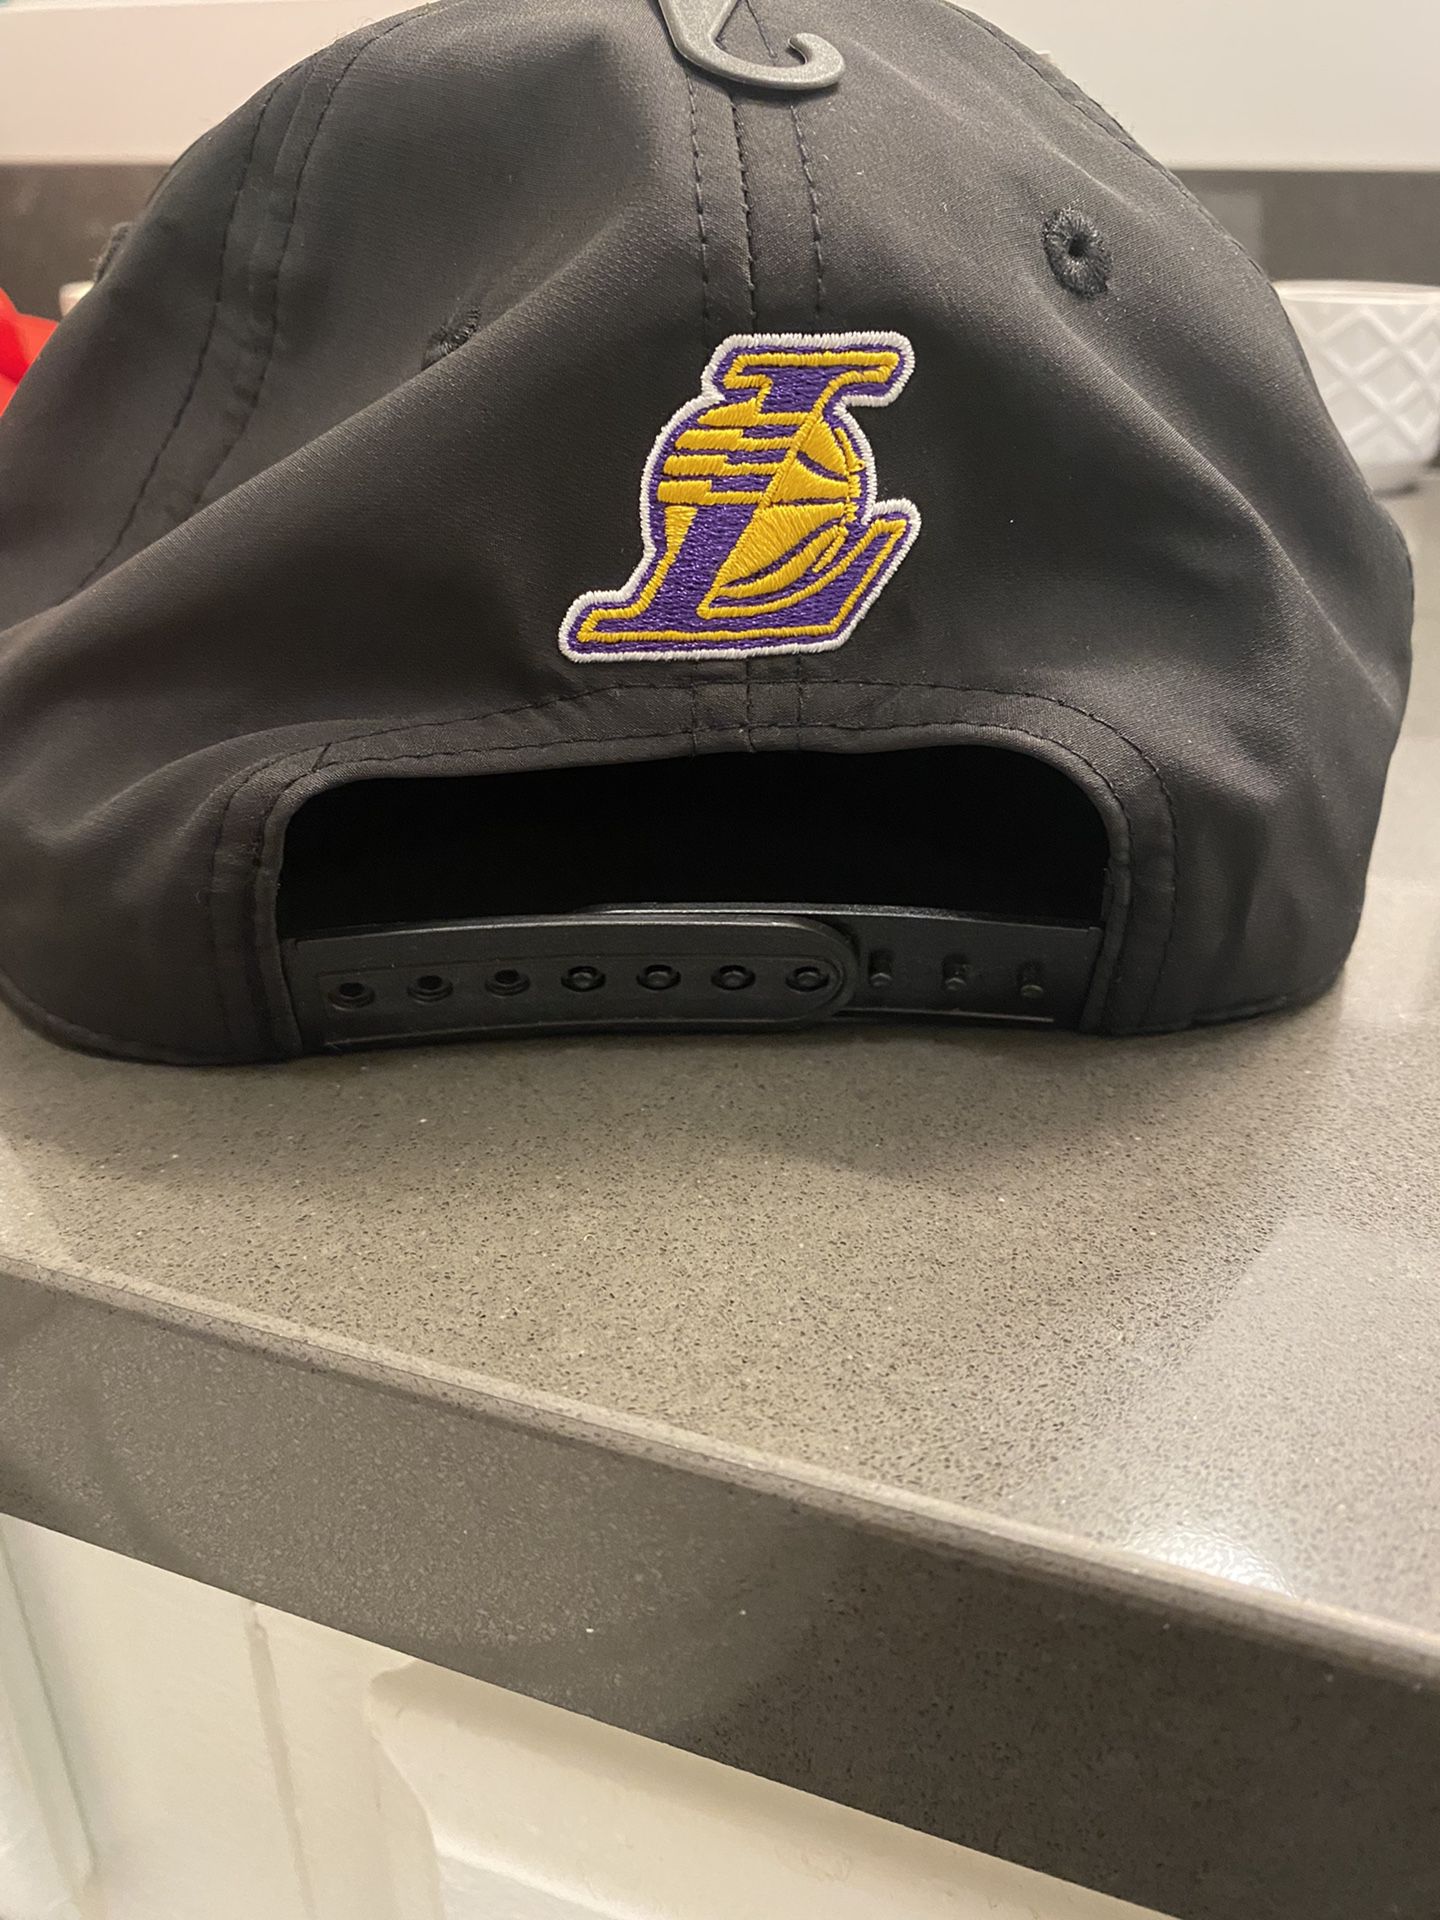 Adidas LAKERS Cap for Sale in Lomita, CA - OfferUp